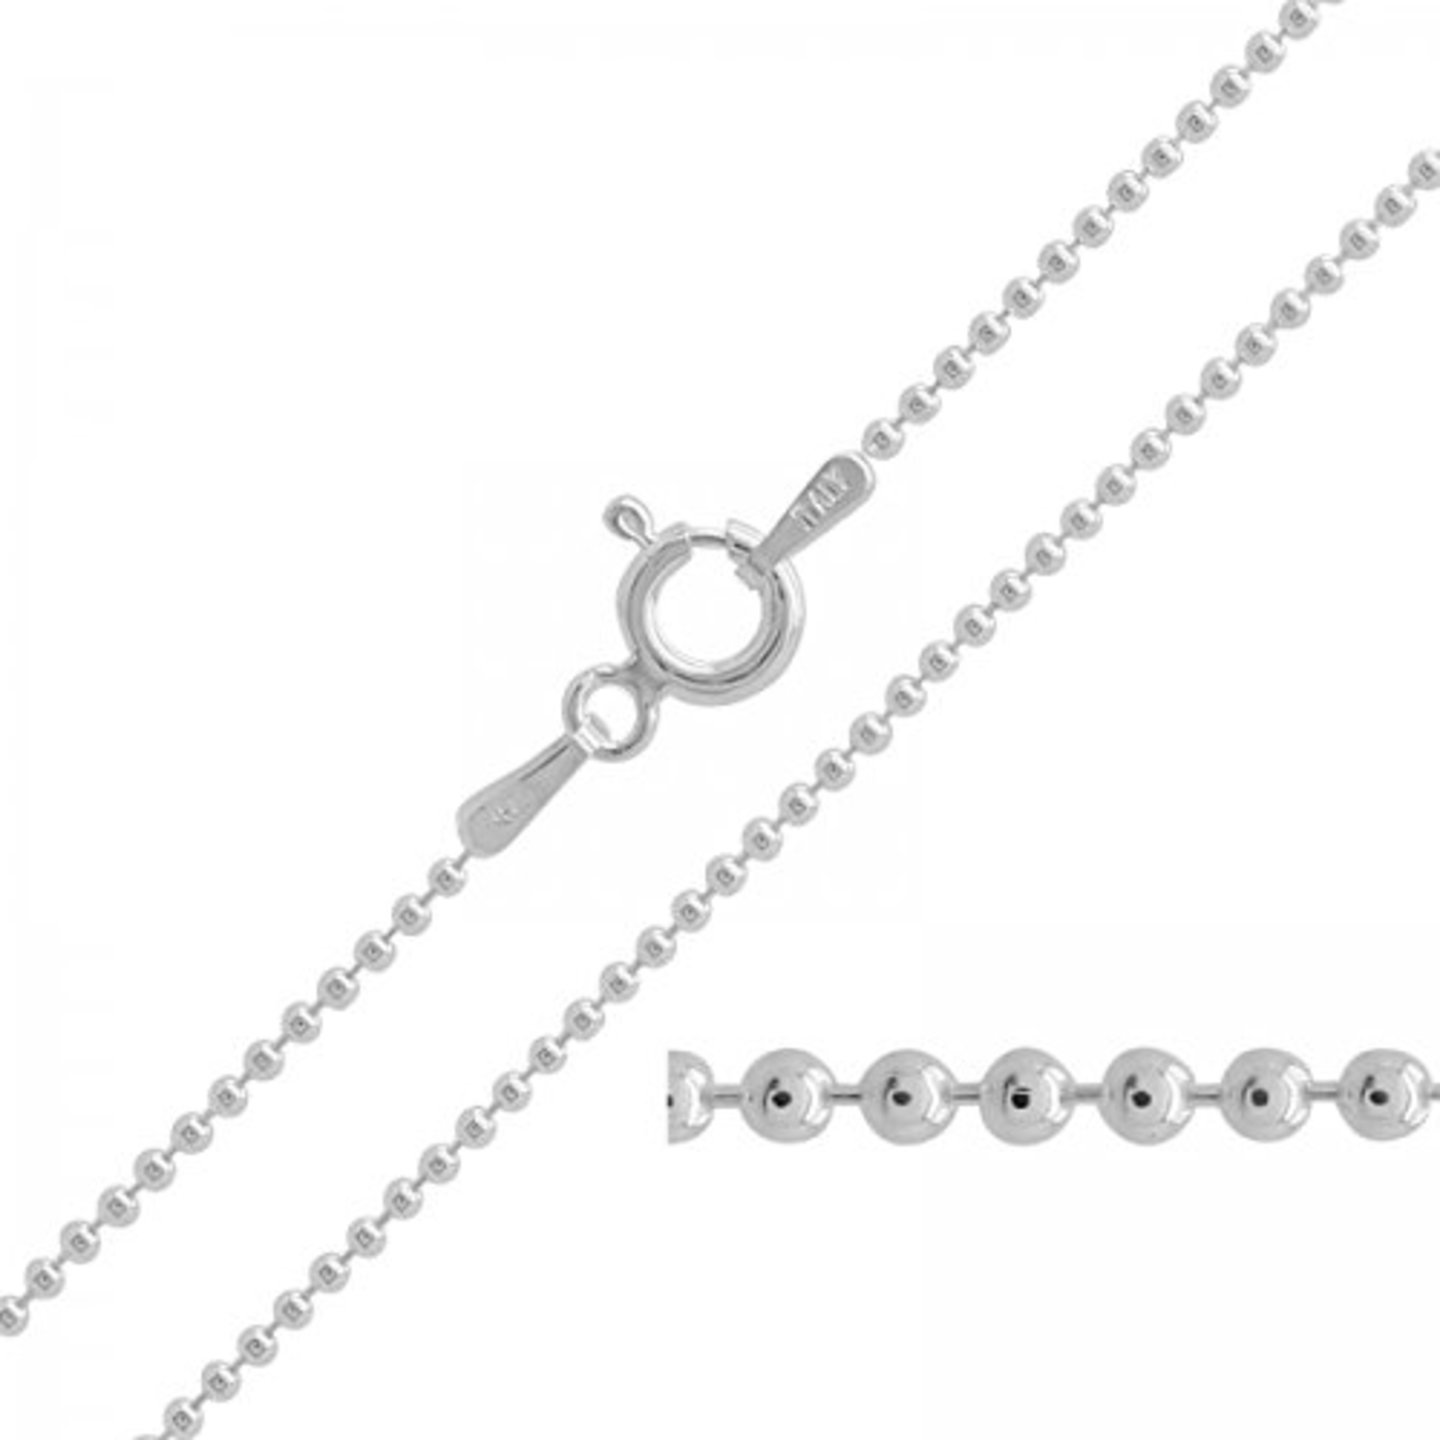 925 Sterling Silver Ball Chain for Women Size 22 inch - Weight 3.800